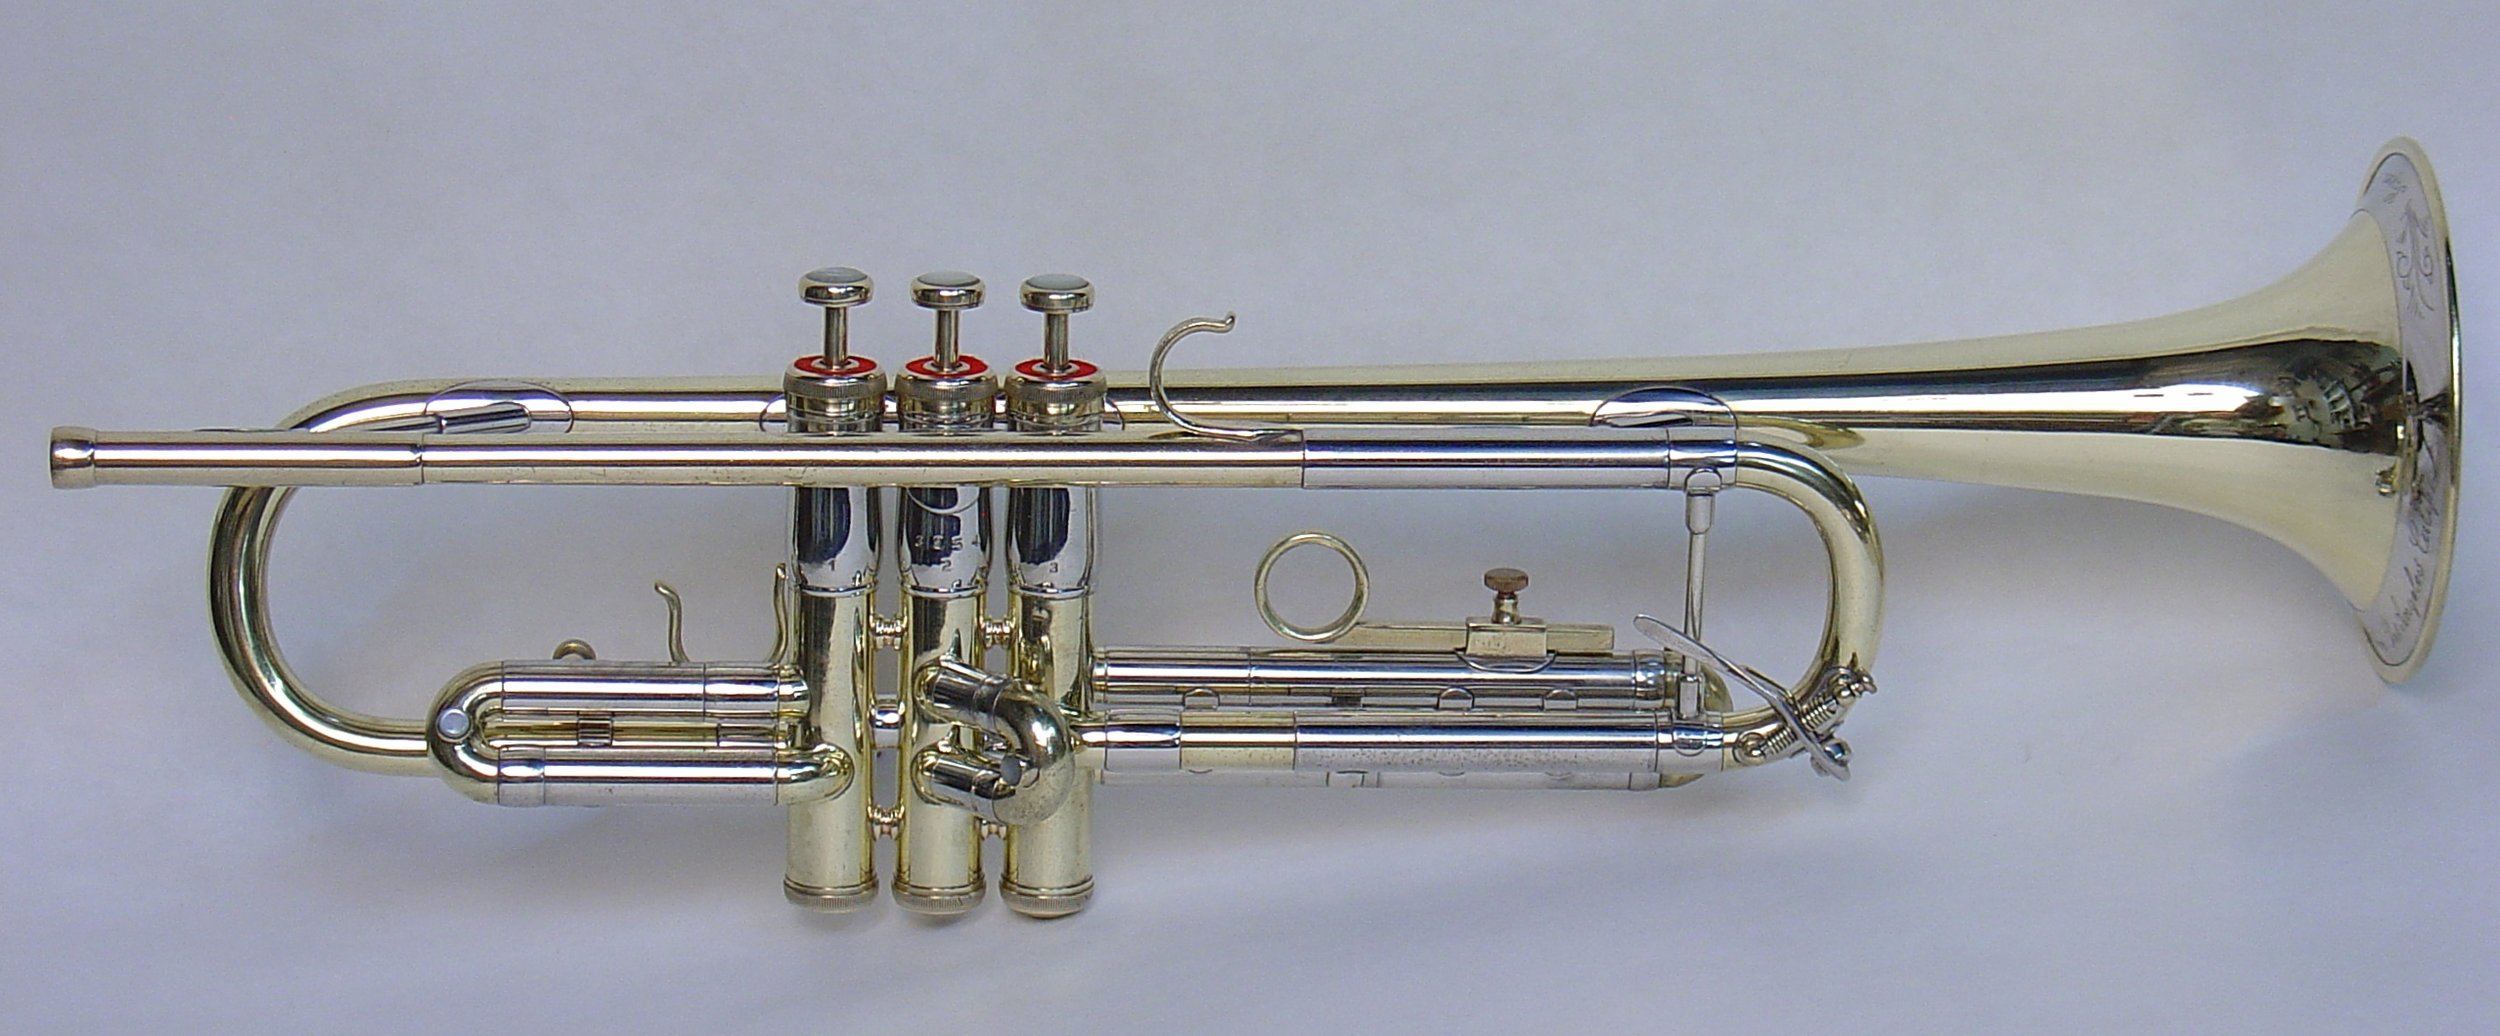 Early Super Olds Trumpets